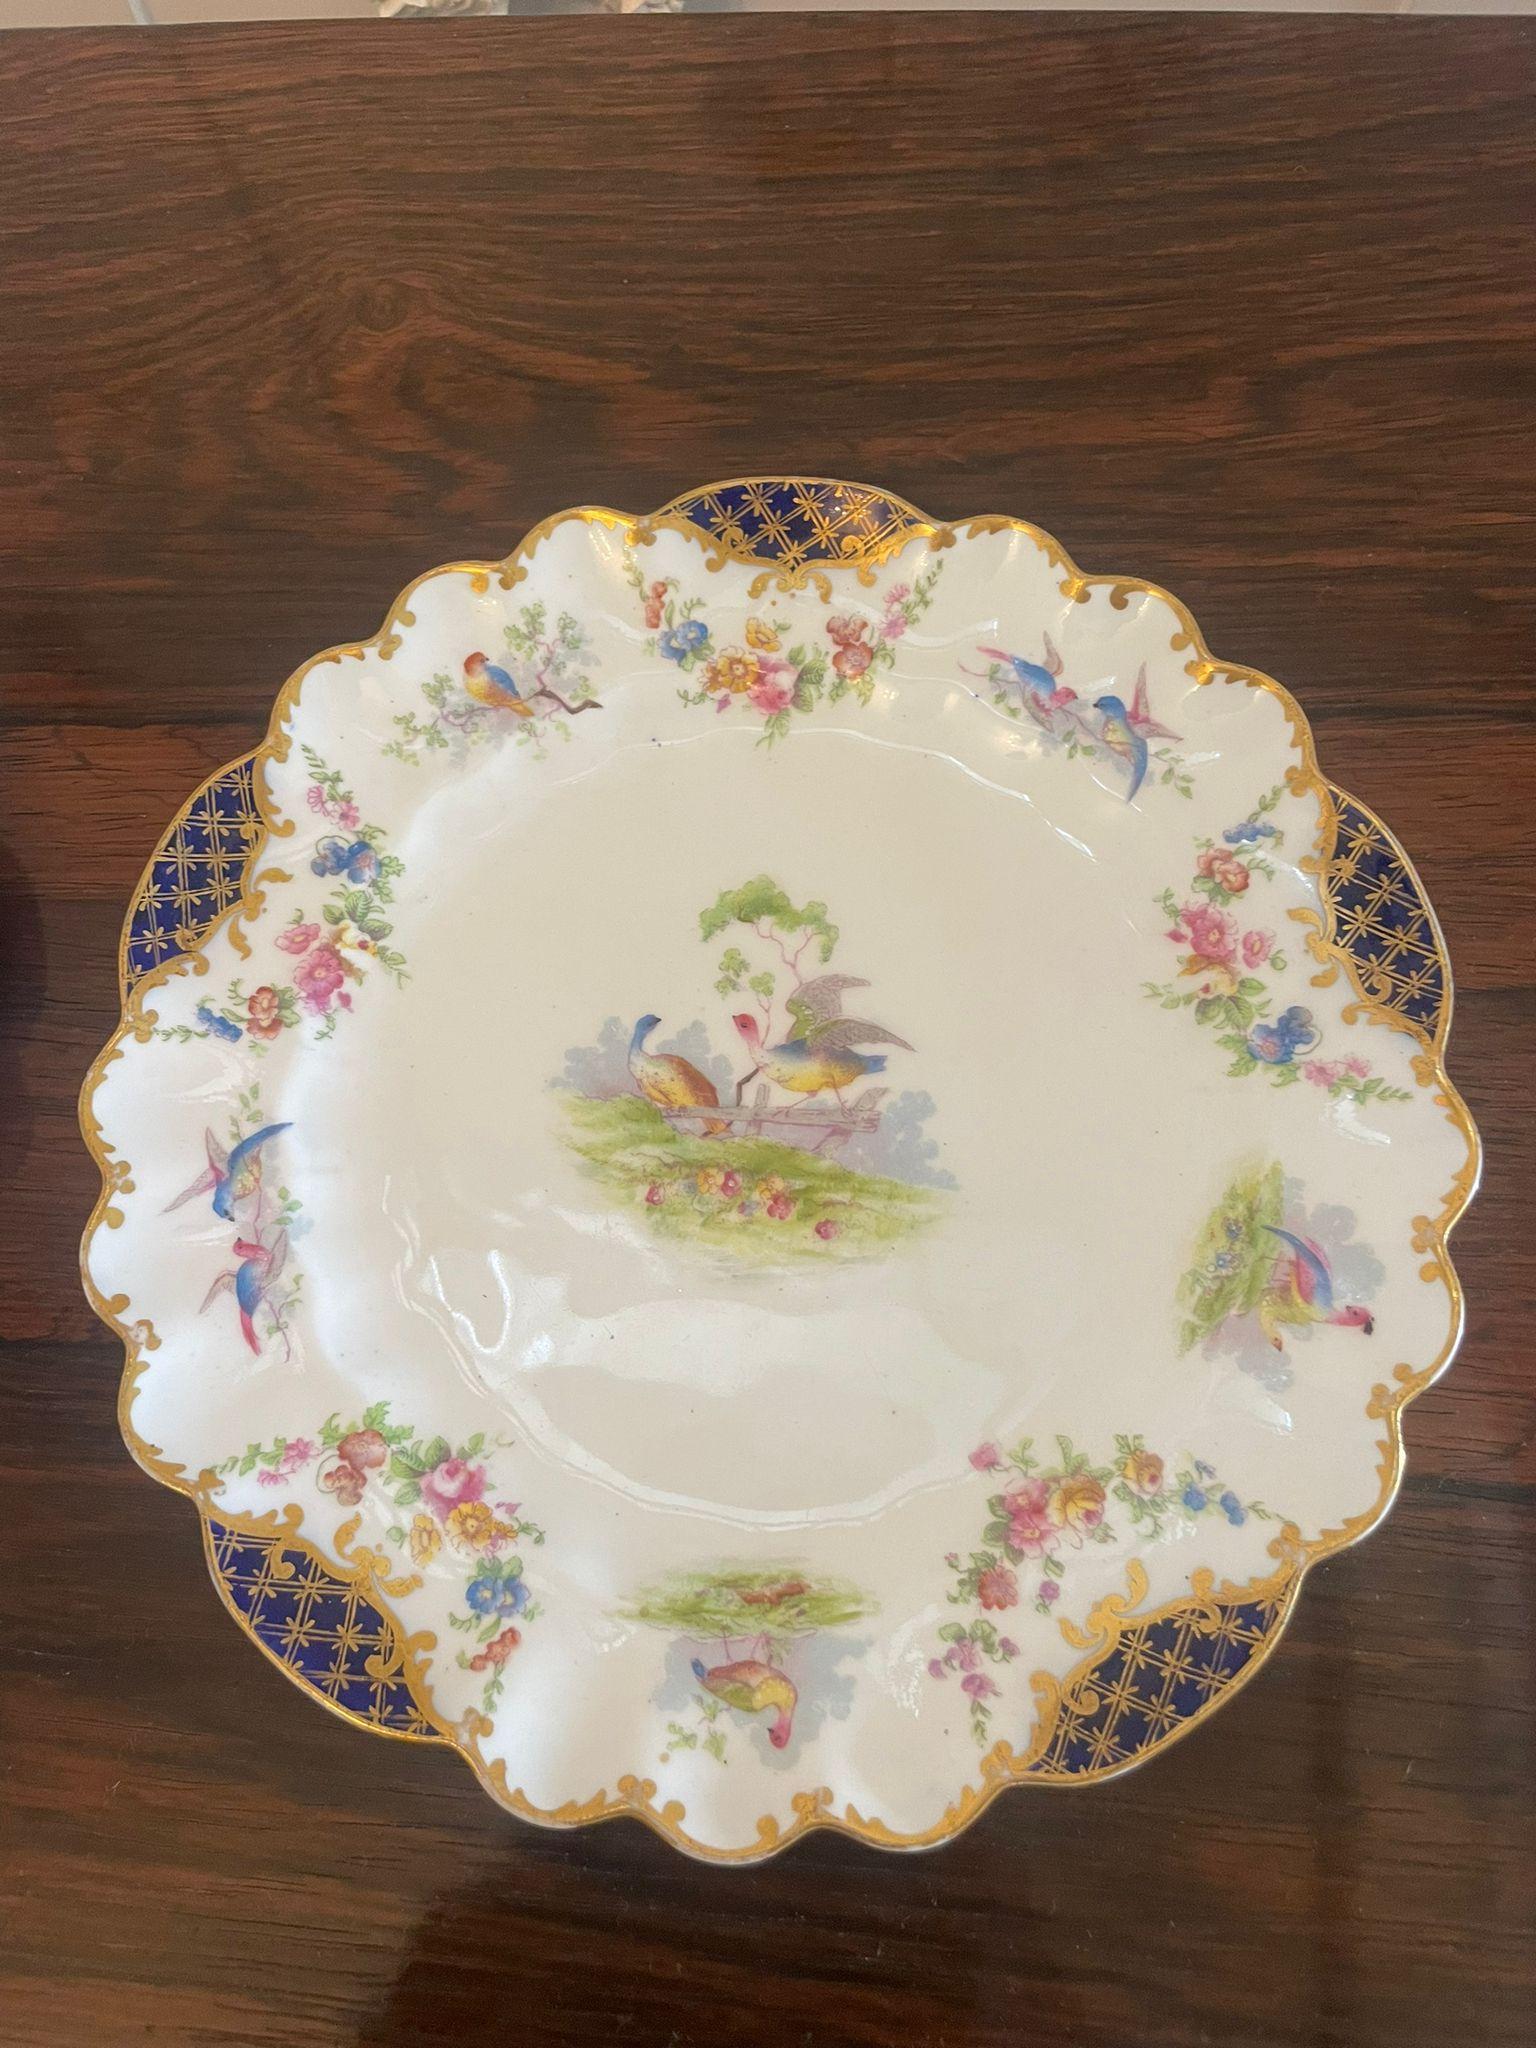 Quality antique hand painted Crescent china plates with fantastic quality hand painted decoration in red, pink, yellow, blue, green and gold colours 


Beautifully decorated in mint condition


Dimensions:
Height 2.3 cm (0.90 in)
Width 2.2 cm (8.66